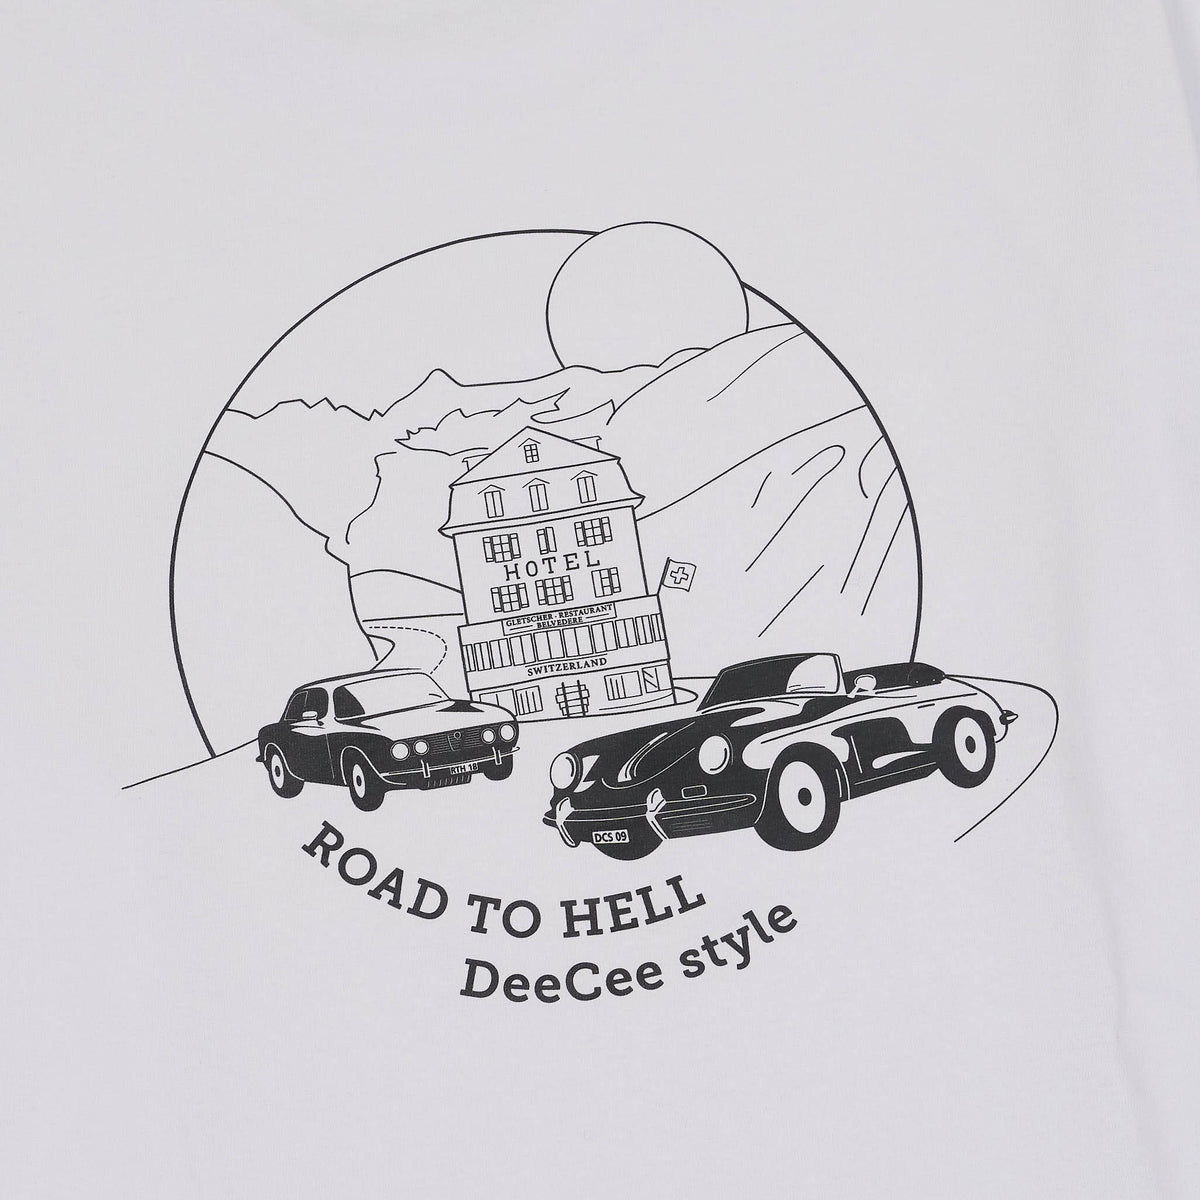 Road to Hell x DeeCee style Heavyweight Crew Neck T-Shirt